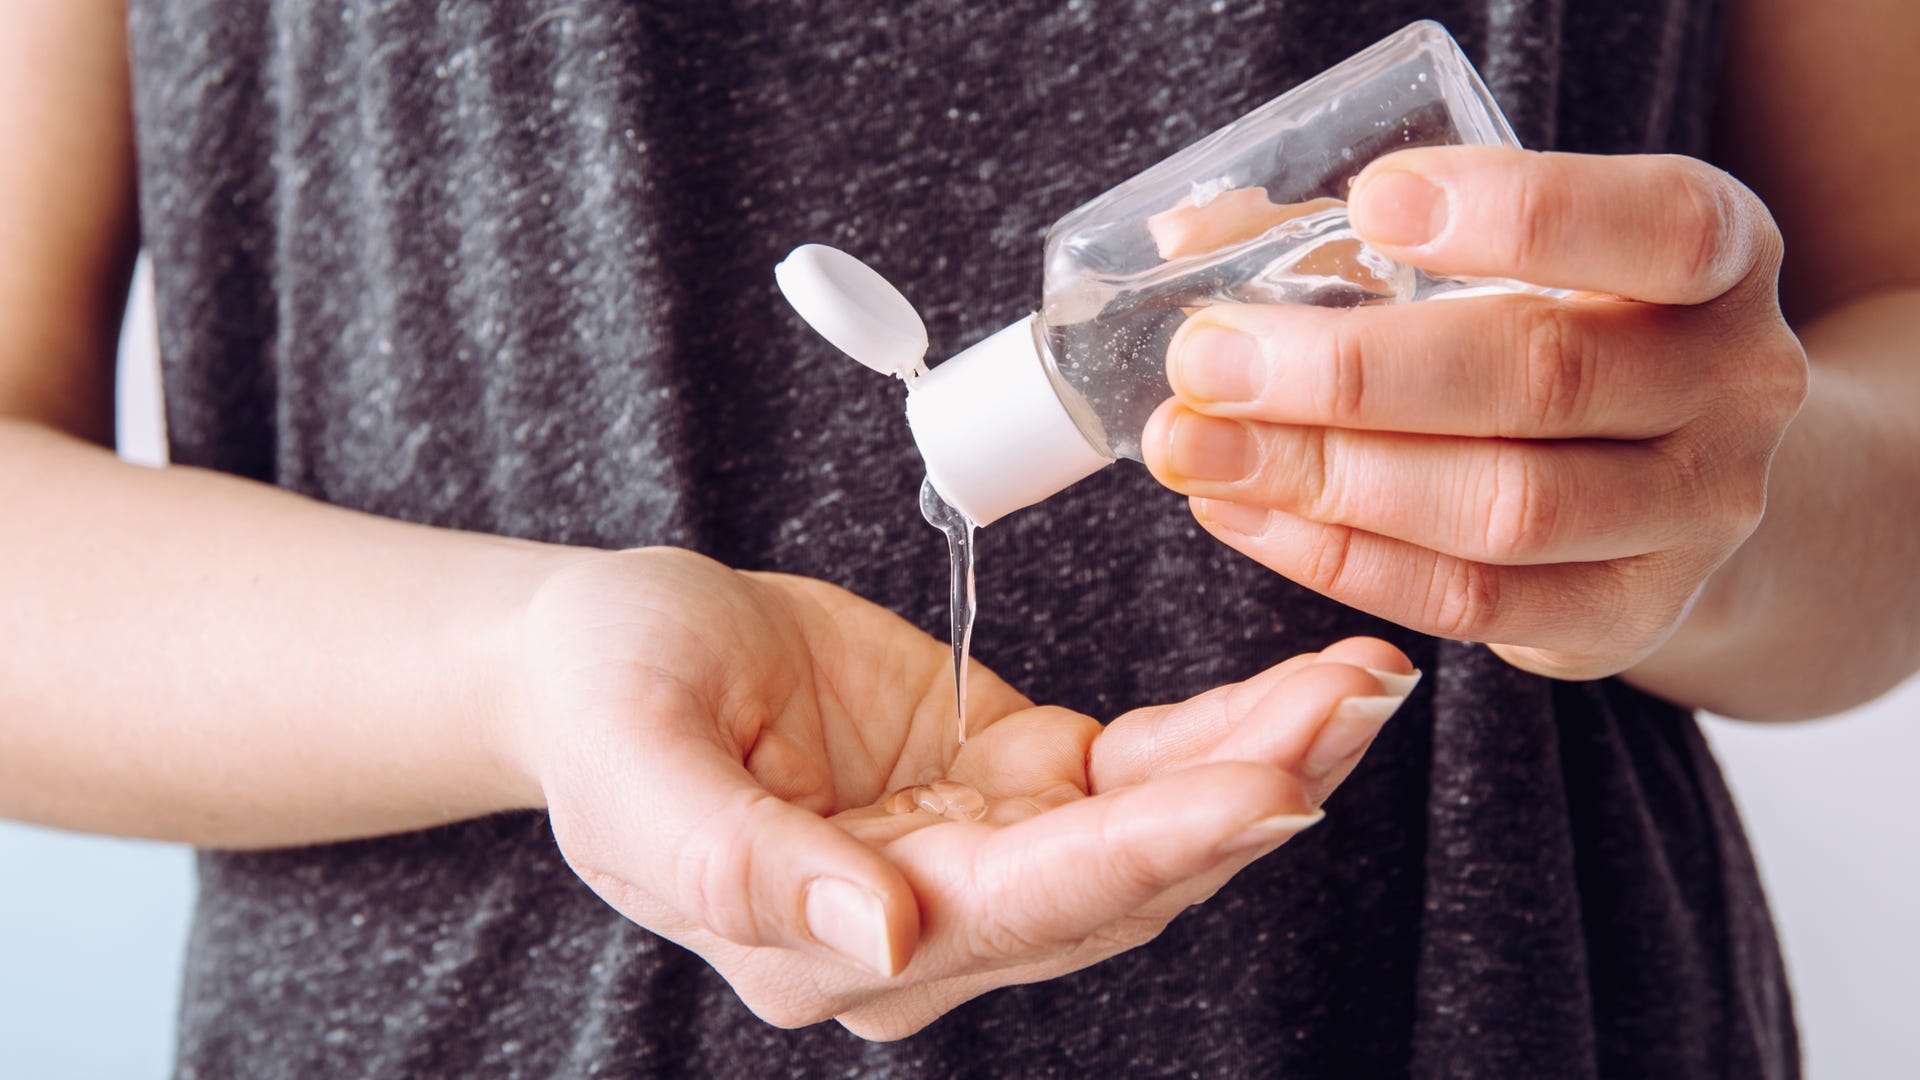 How to make your own hand sanitizer at home and whether it can be effective